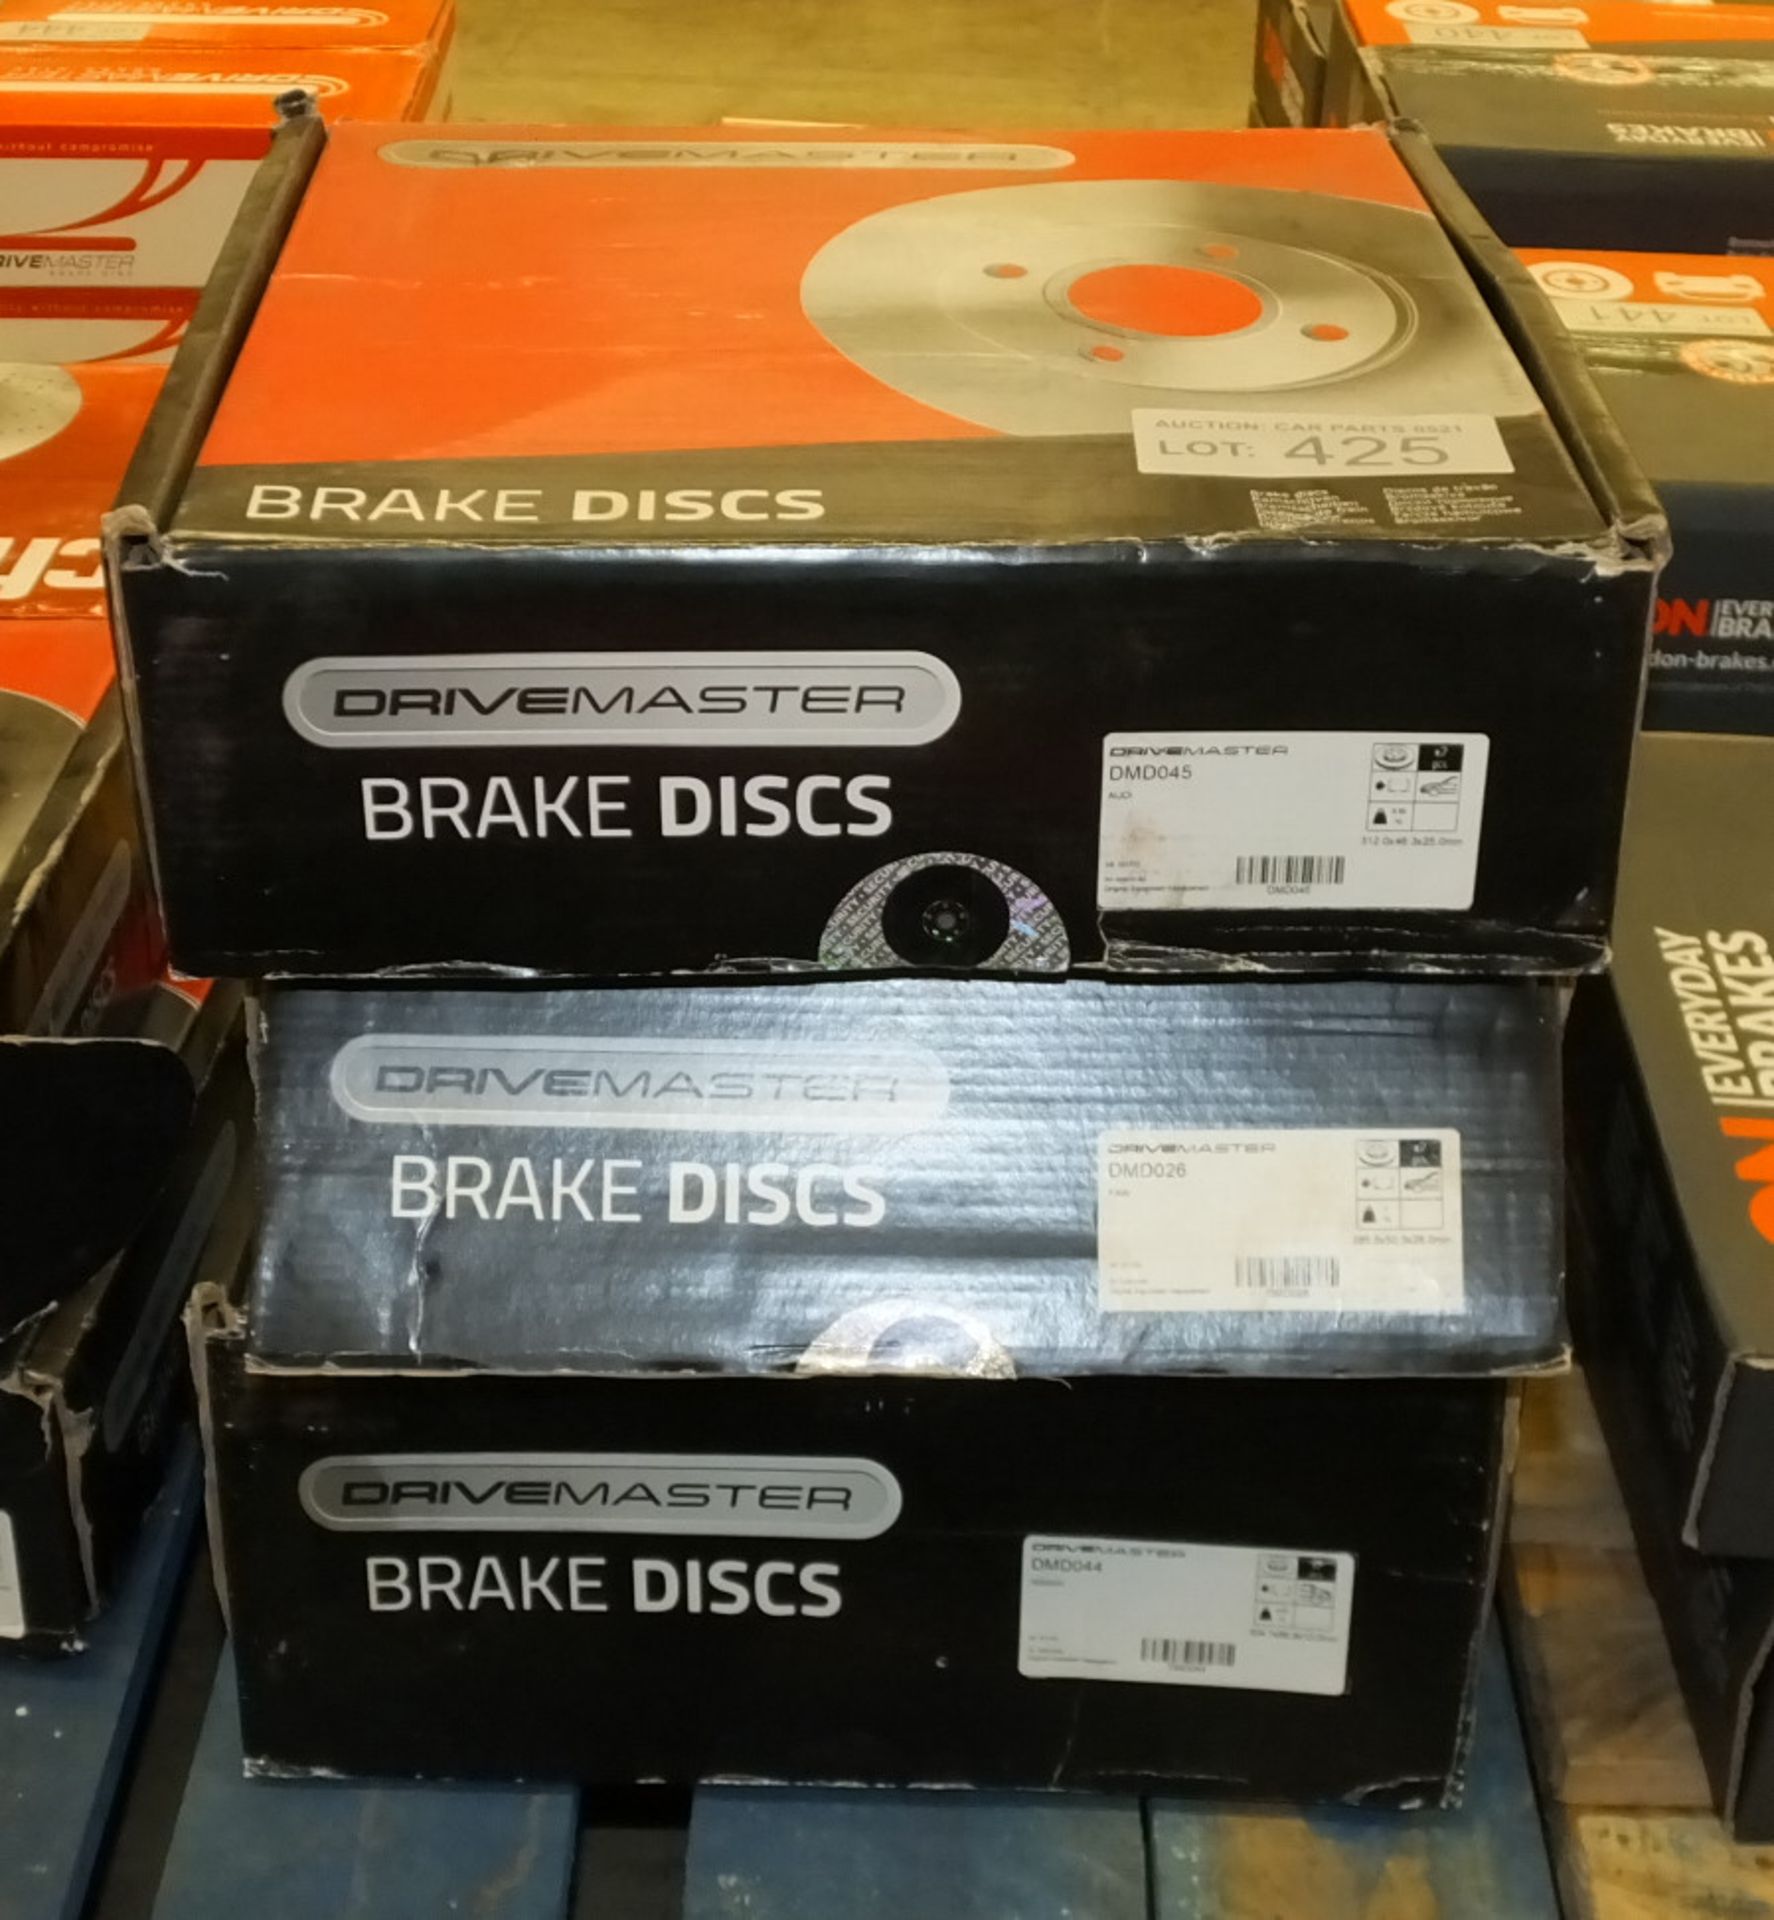 3x Drivemaster Brake Disc Sets - Please see pictures for model numbers